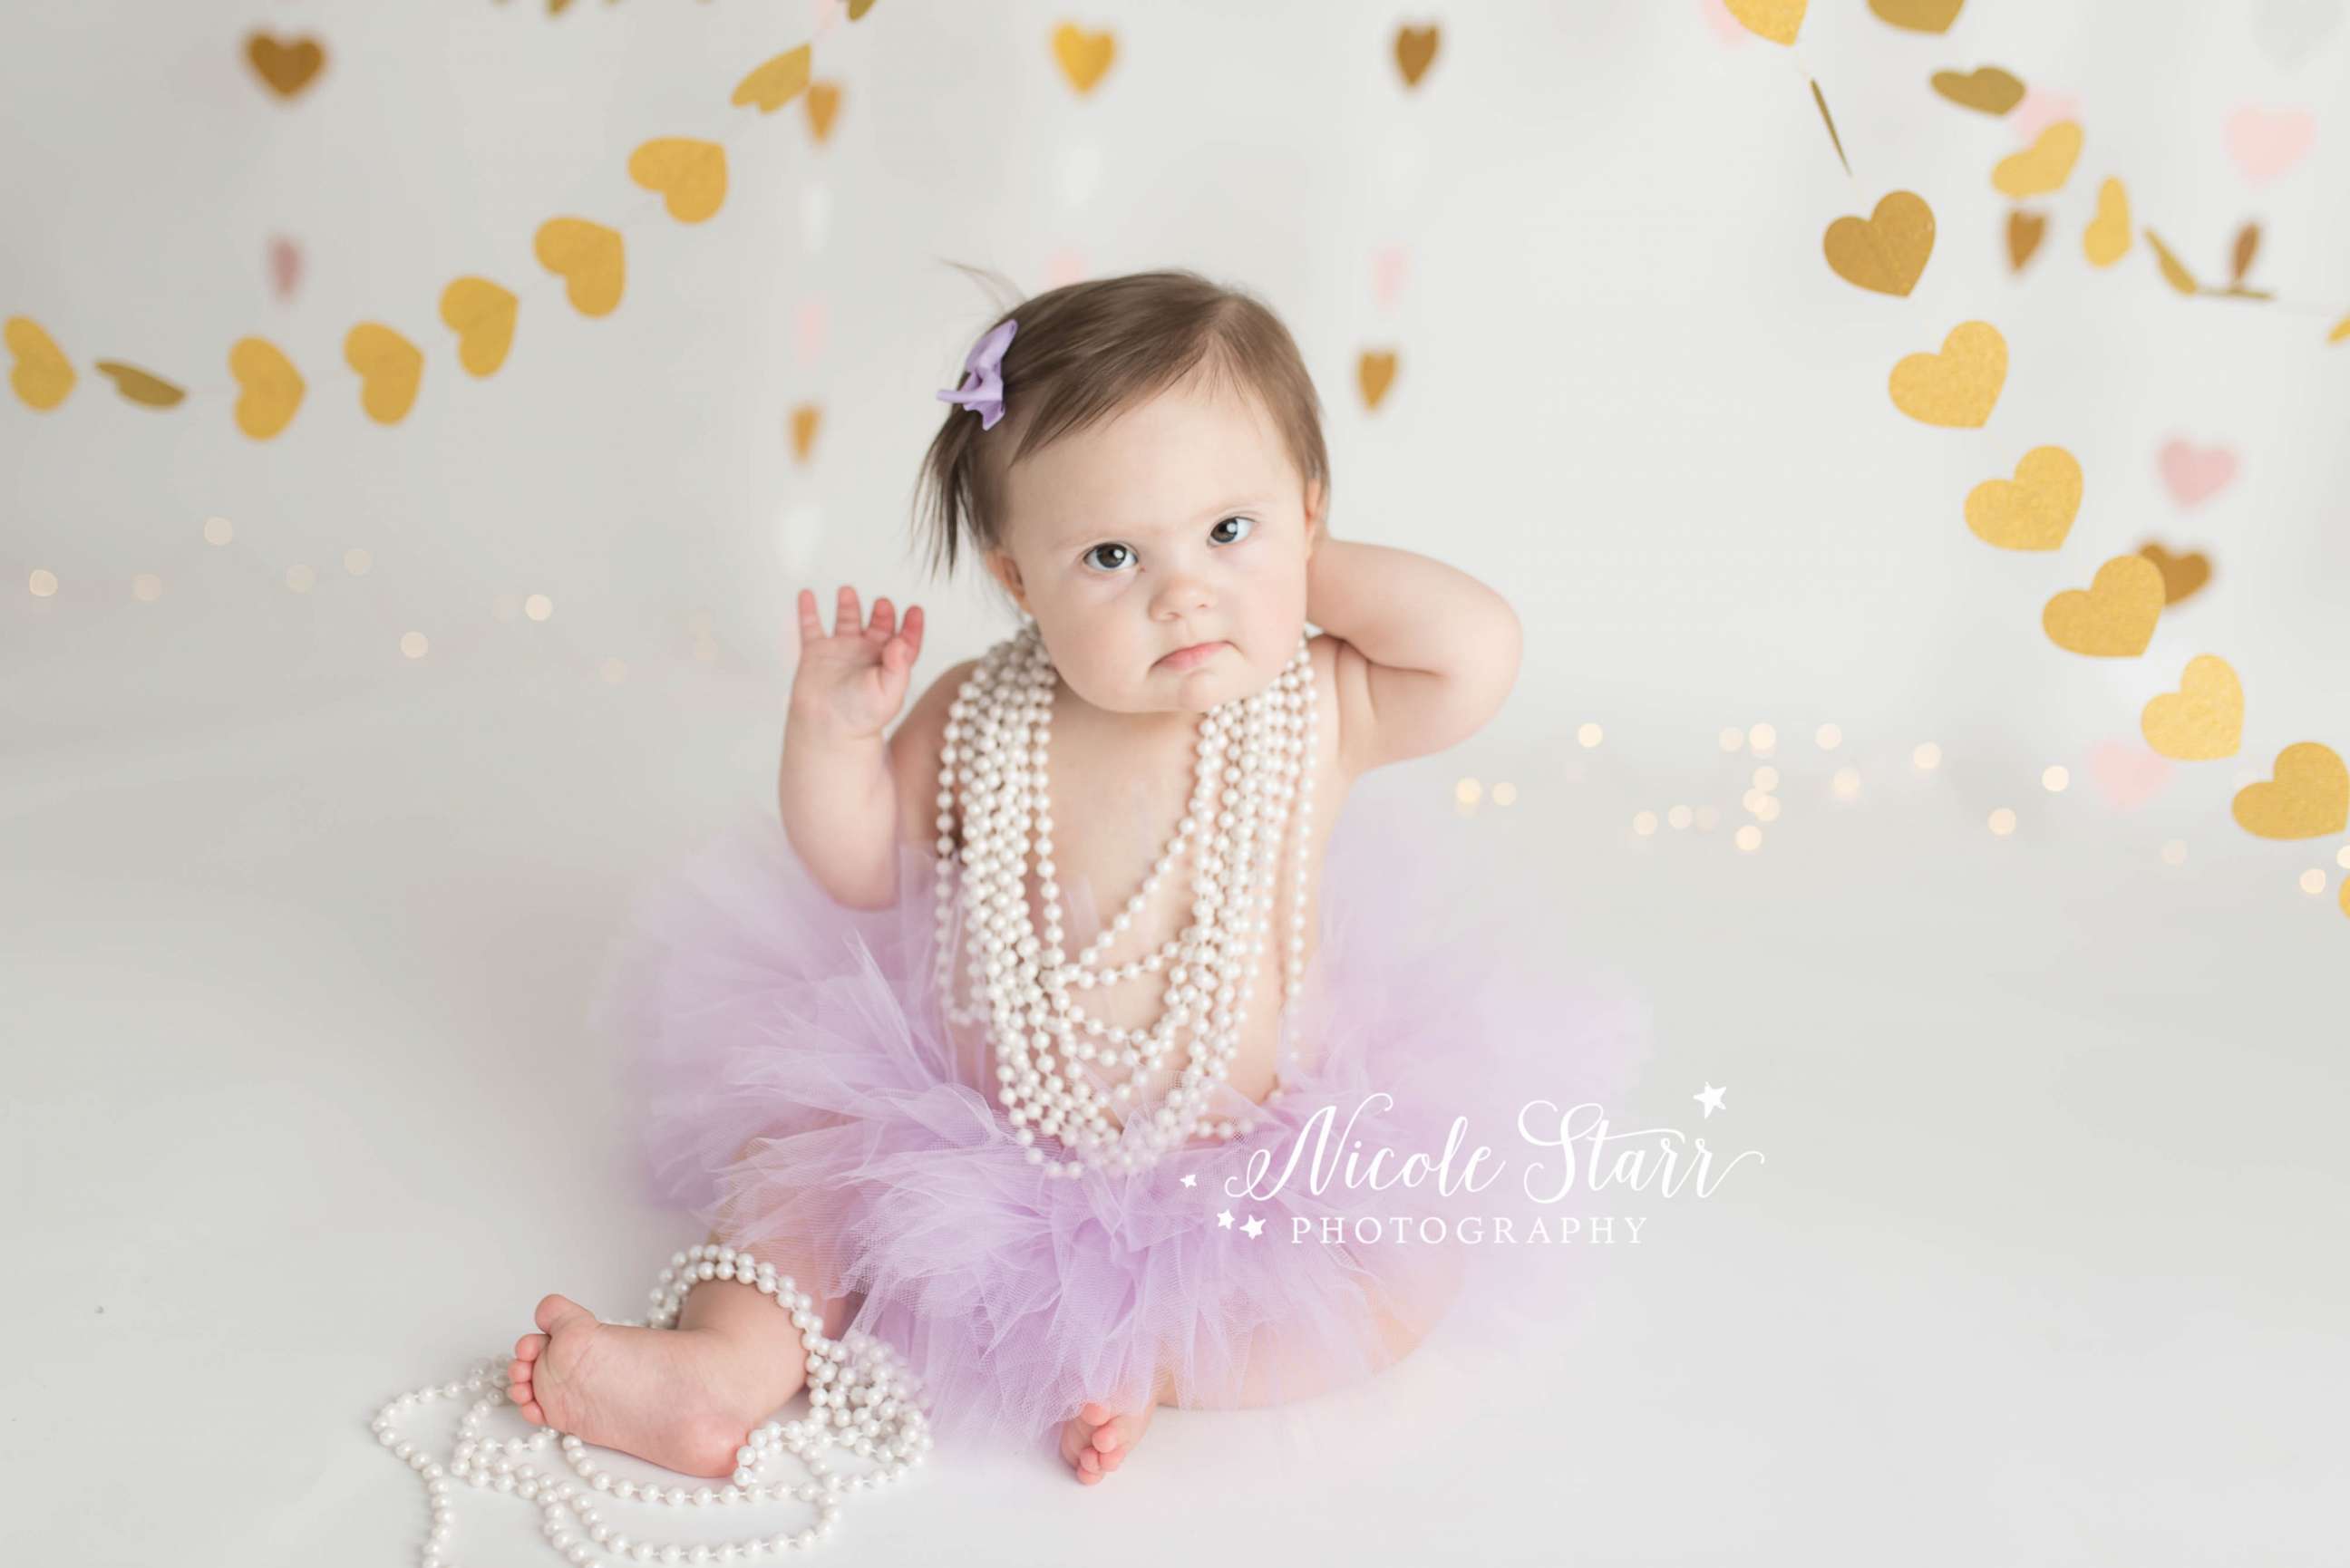 PHOTO: Babies' Three of Hearts photo shoot celebrates Down syndrome and life after heart surgery.
